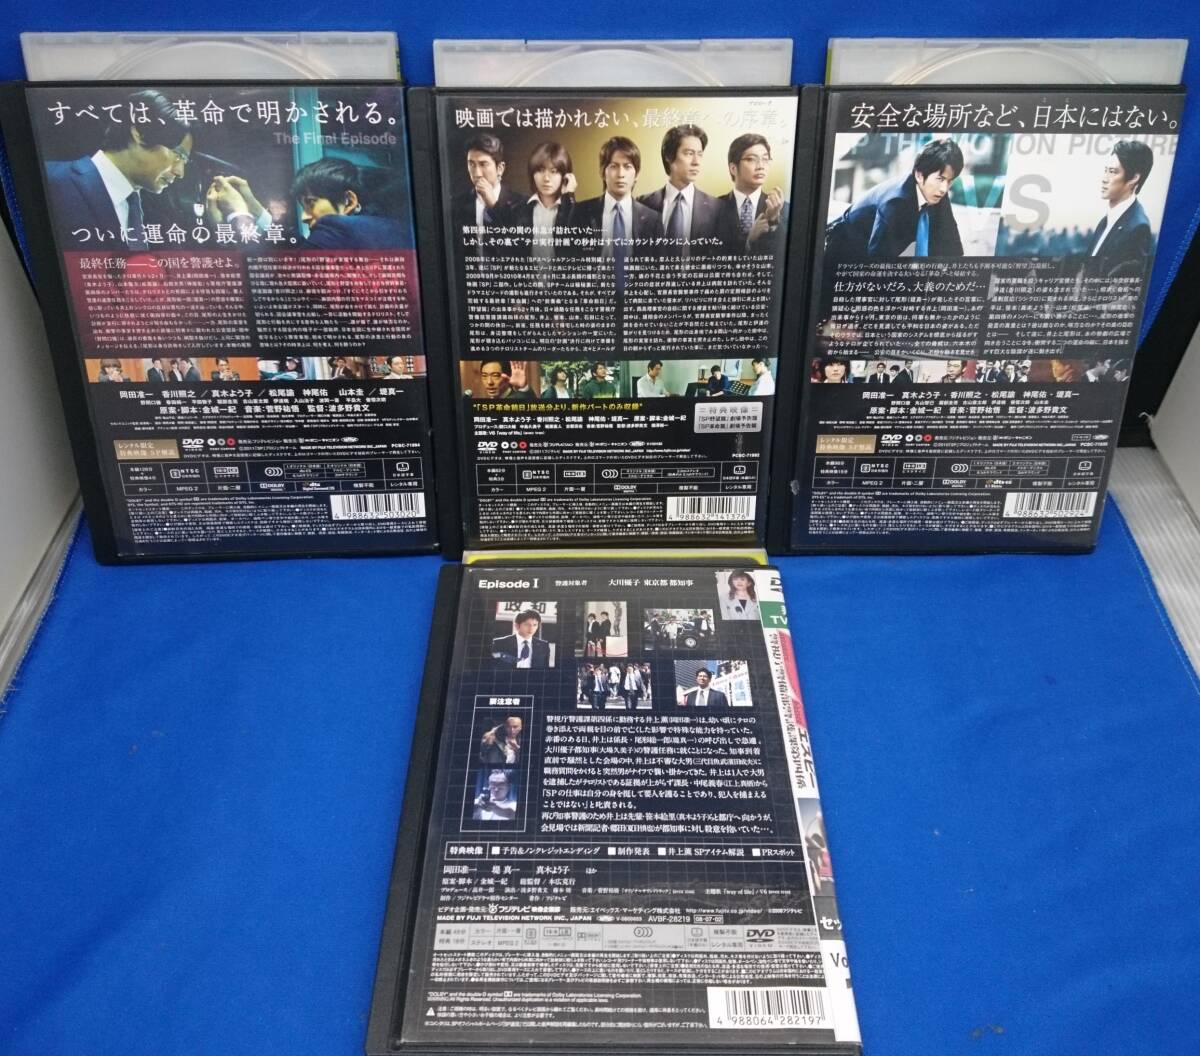 【SP・DVD8本セット】「SP 革命編」「SP 革命前日」「SP 野望編」「SP TVドラマ1～5」 / 岡田准一 堤真一 真木よう子 松尾諭 ジャンクの画像3